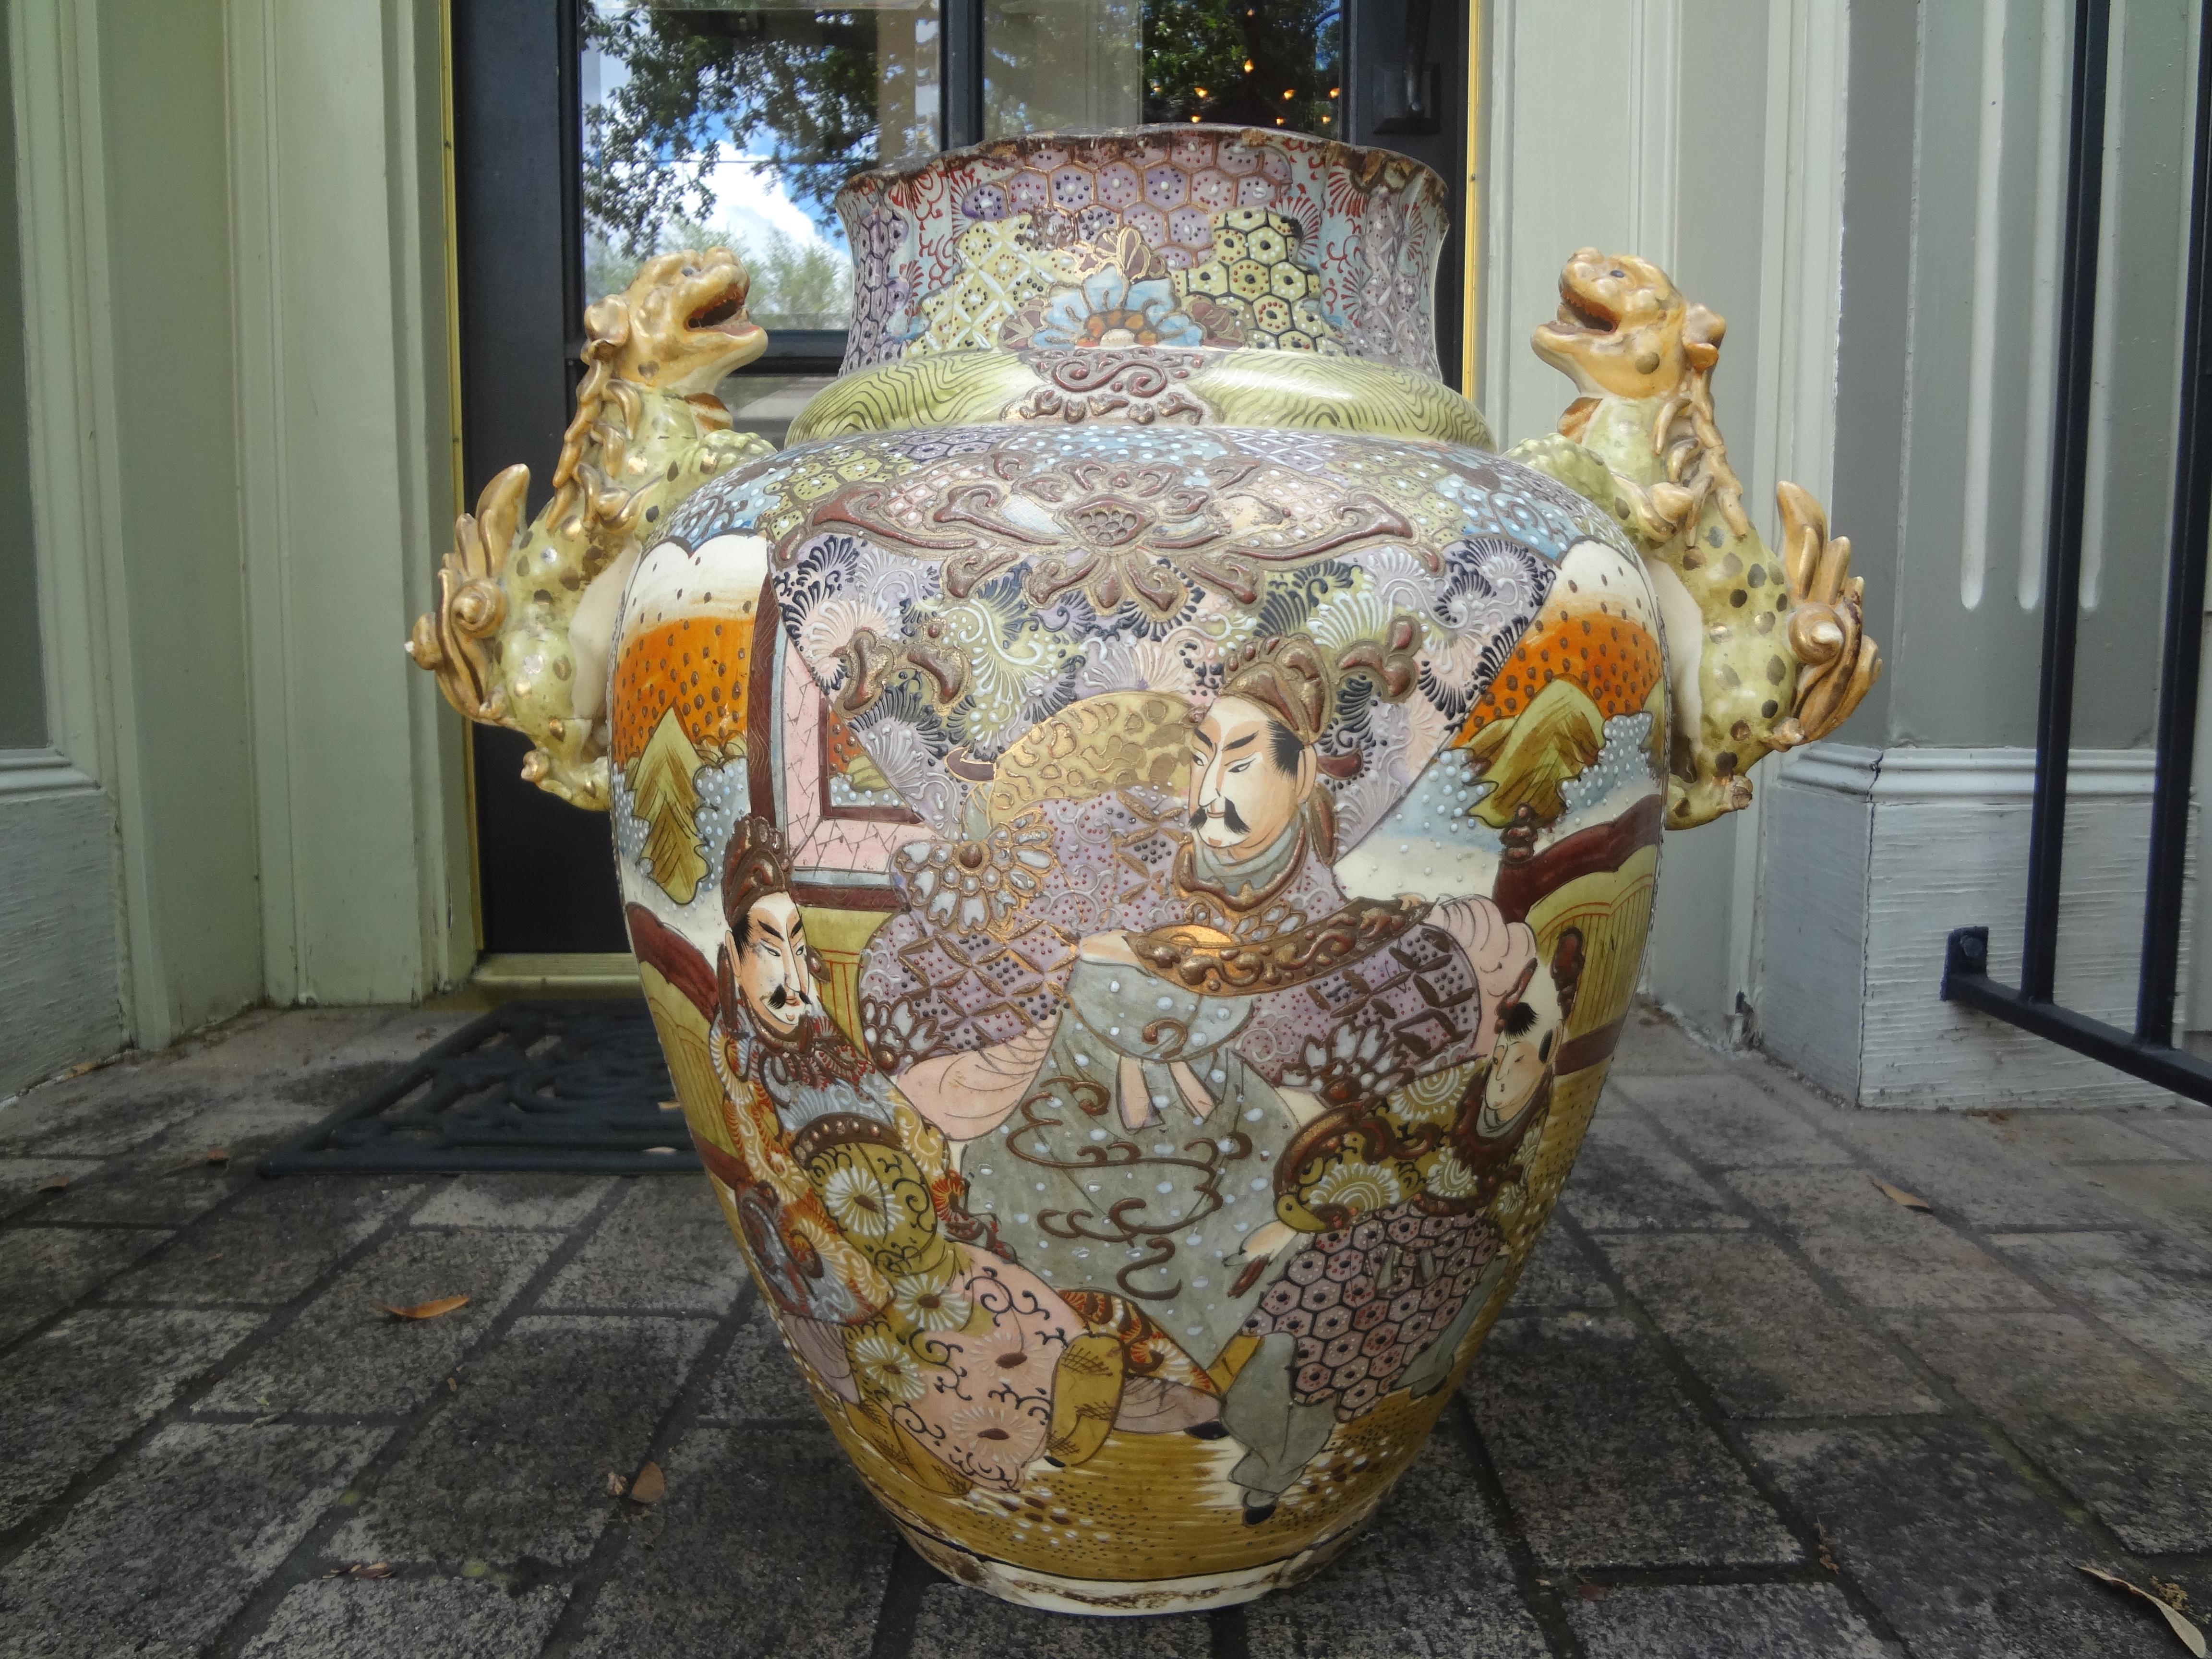 19th century Japanese Meiji palace urn with foo dog handles.
Stunning large antique Japanese Meiji period palace urn with foo dog handles. This gorgeous Asian Satsuma style urn is beautifully decorated in unusual raised pastel colors with foo dog